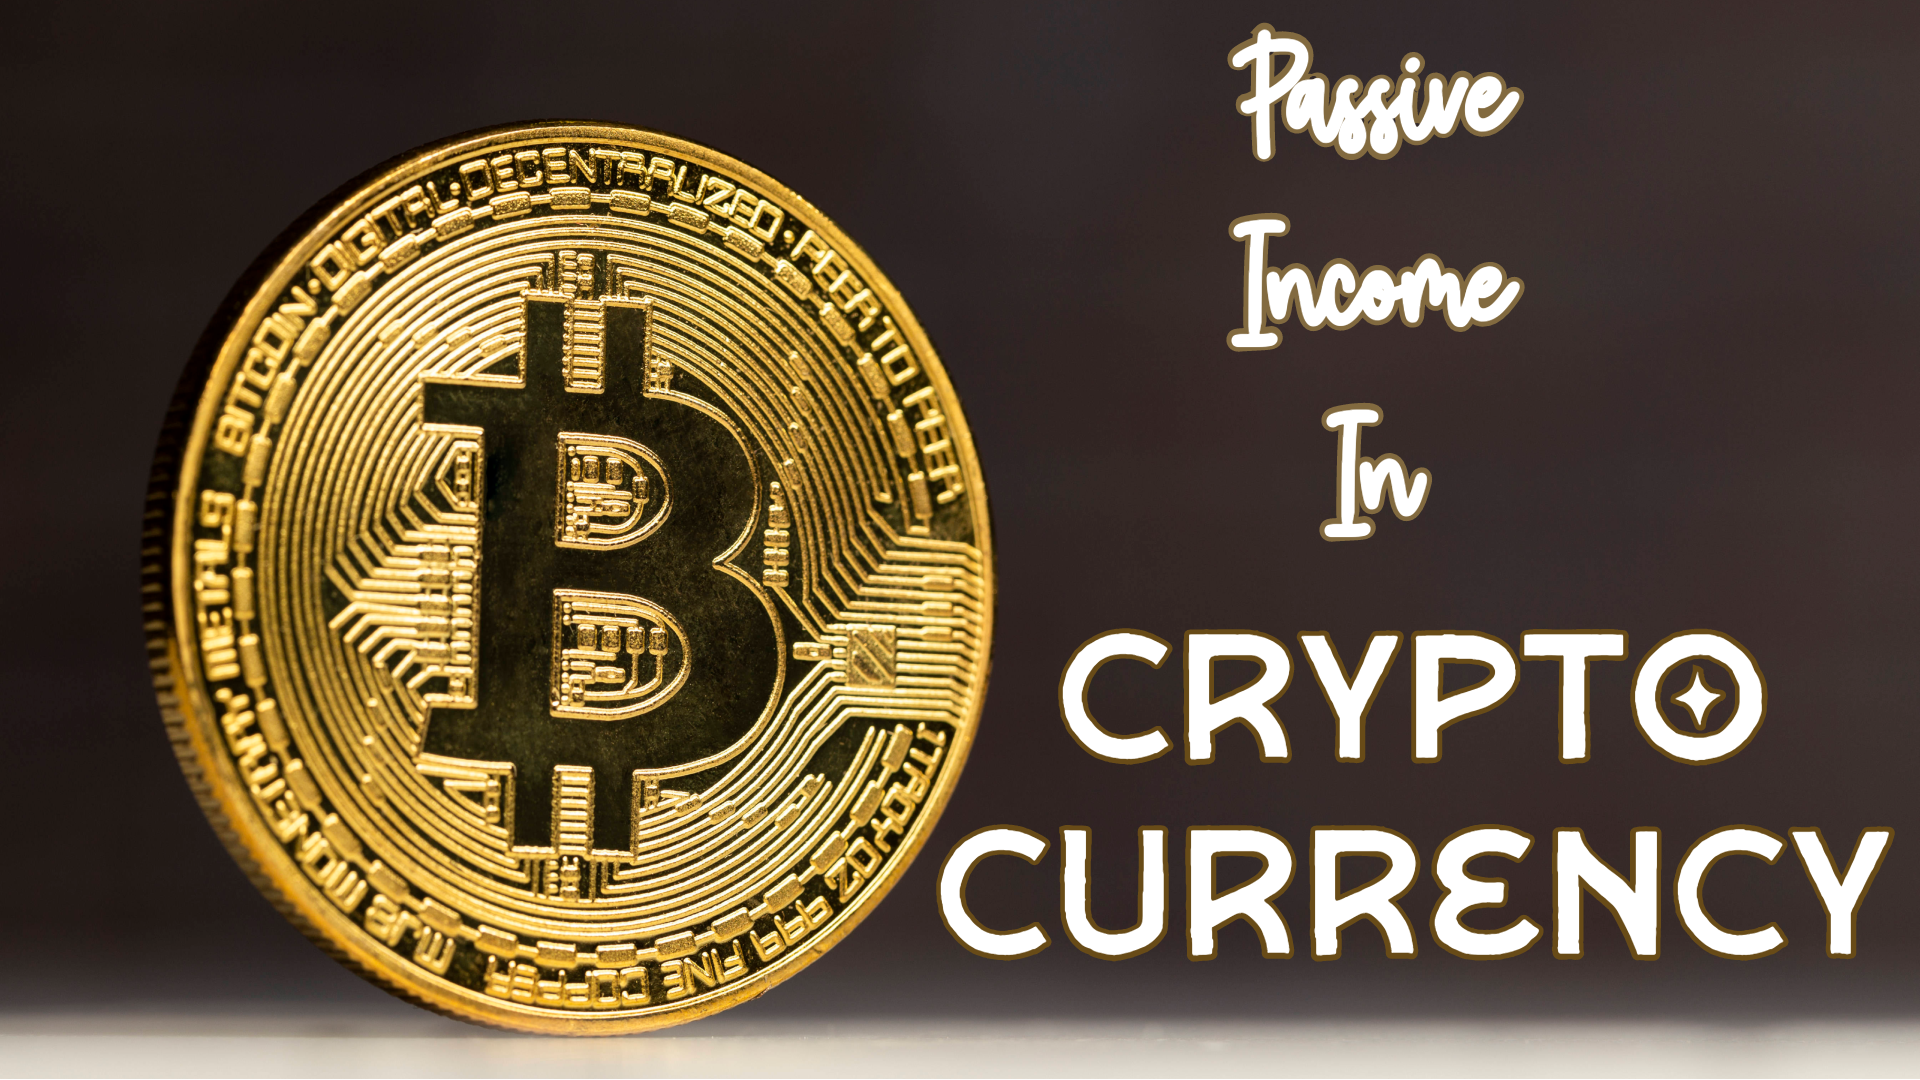 Passive Income in CryptoCurrency